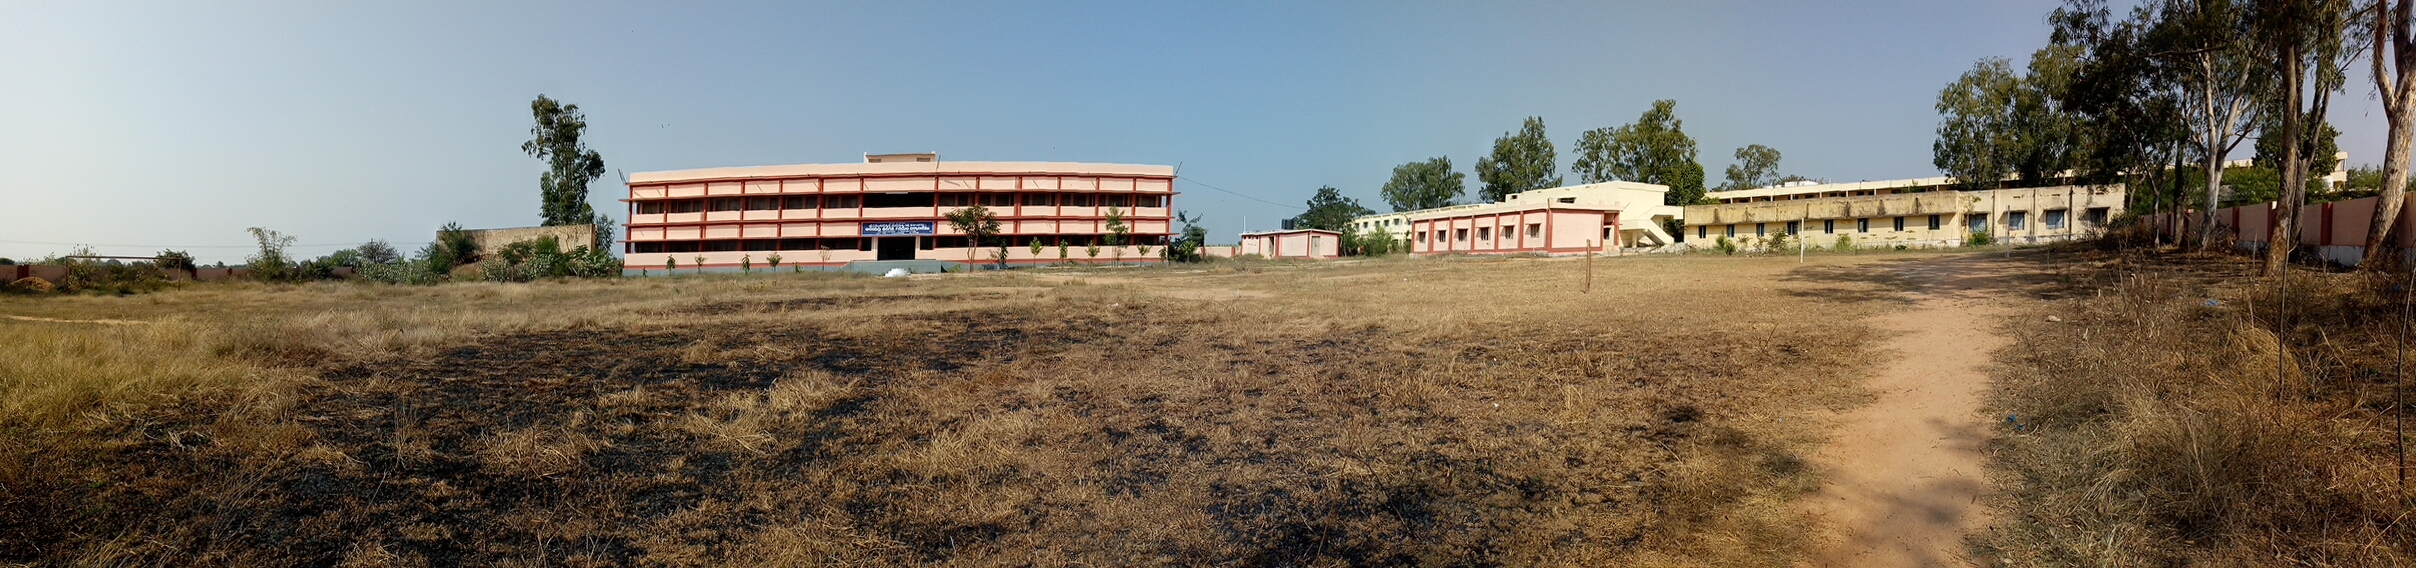 RUSA Building & College ground